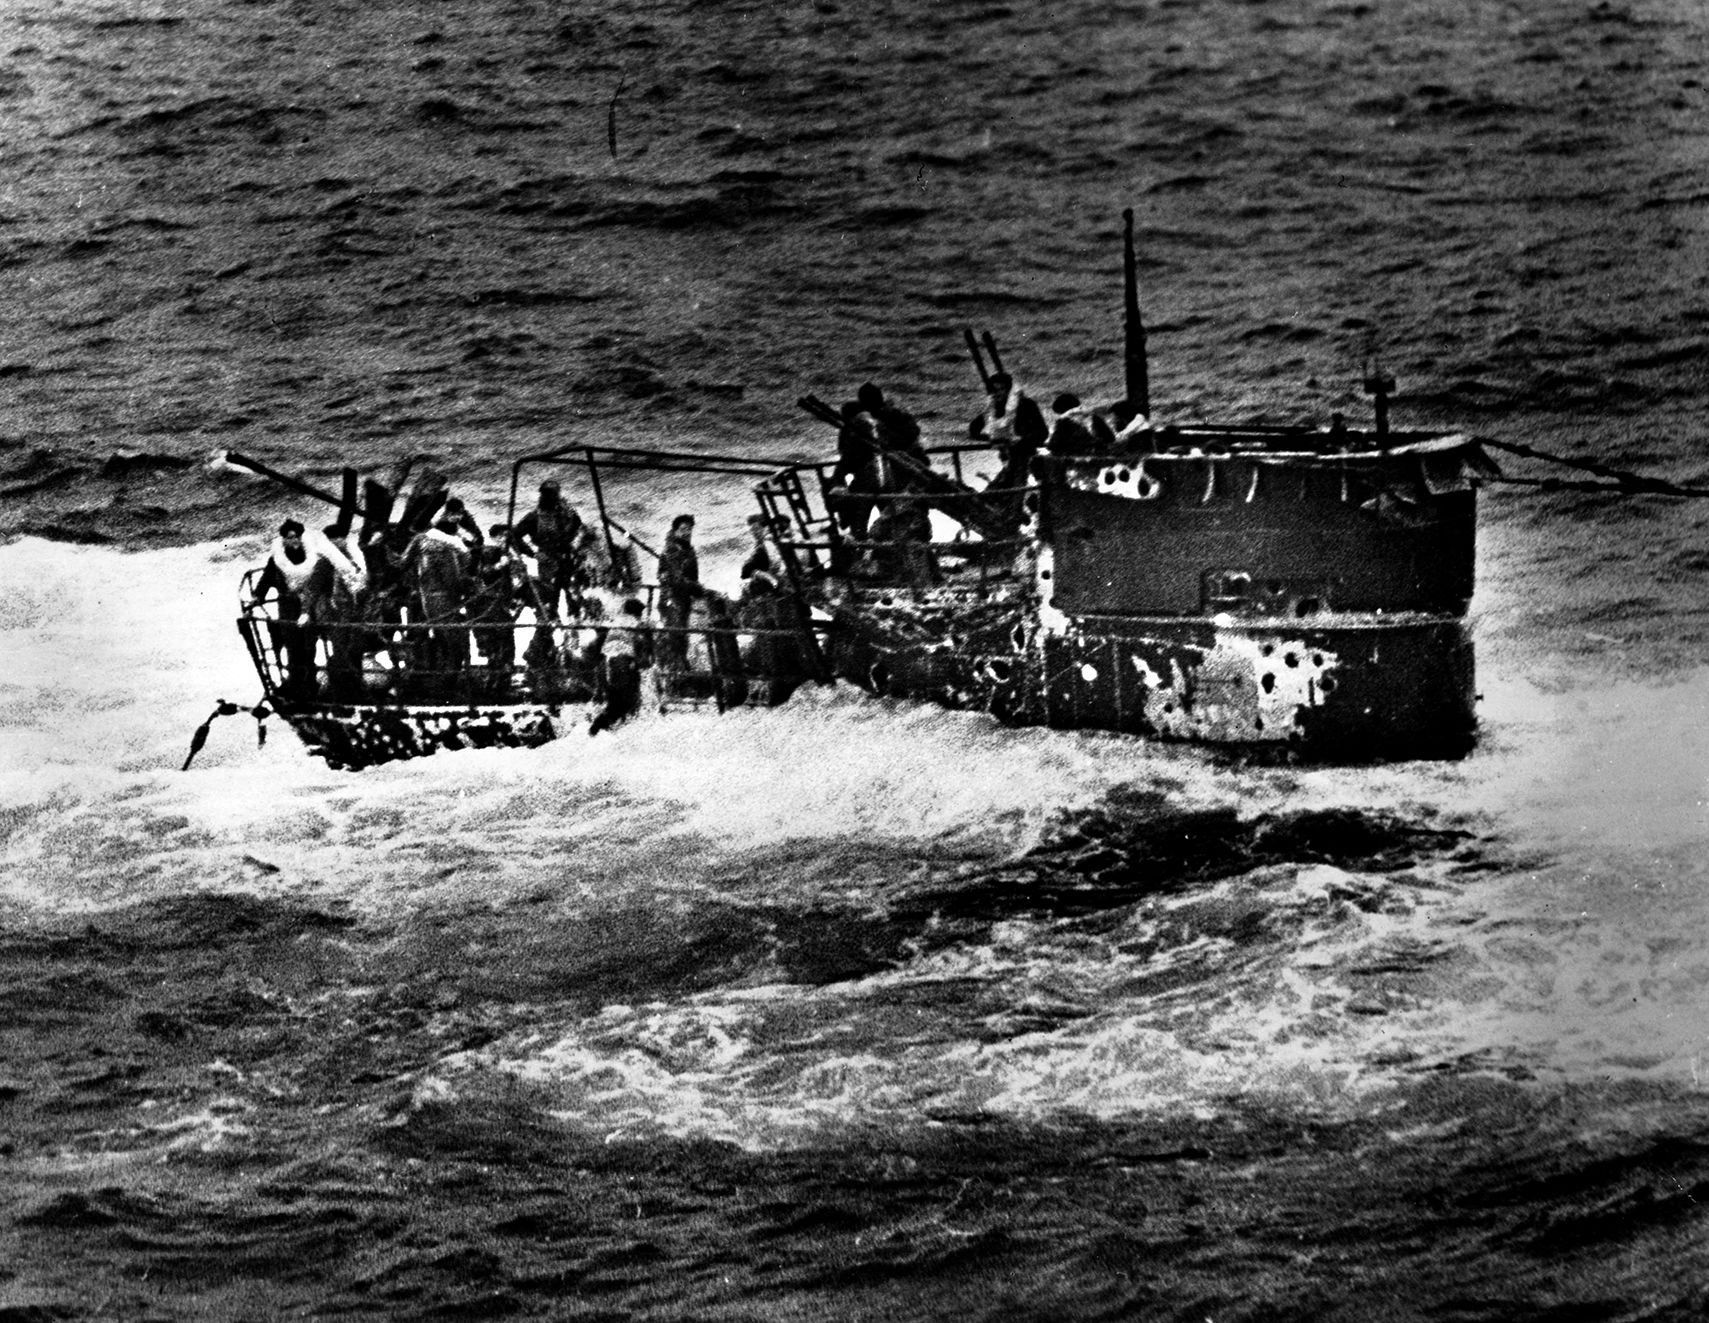 German sailors frantically make their way to the deck of the submarine U-550 after damage from Coast Guard and U.S. Navy warships forced it to the surface. Twelve Germans were taken prisoner aboard the USS Joyce, a Coast Guard destroyer escort originally built for the Navy.